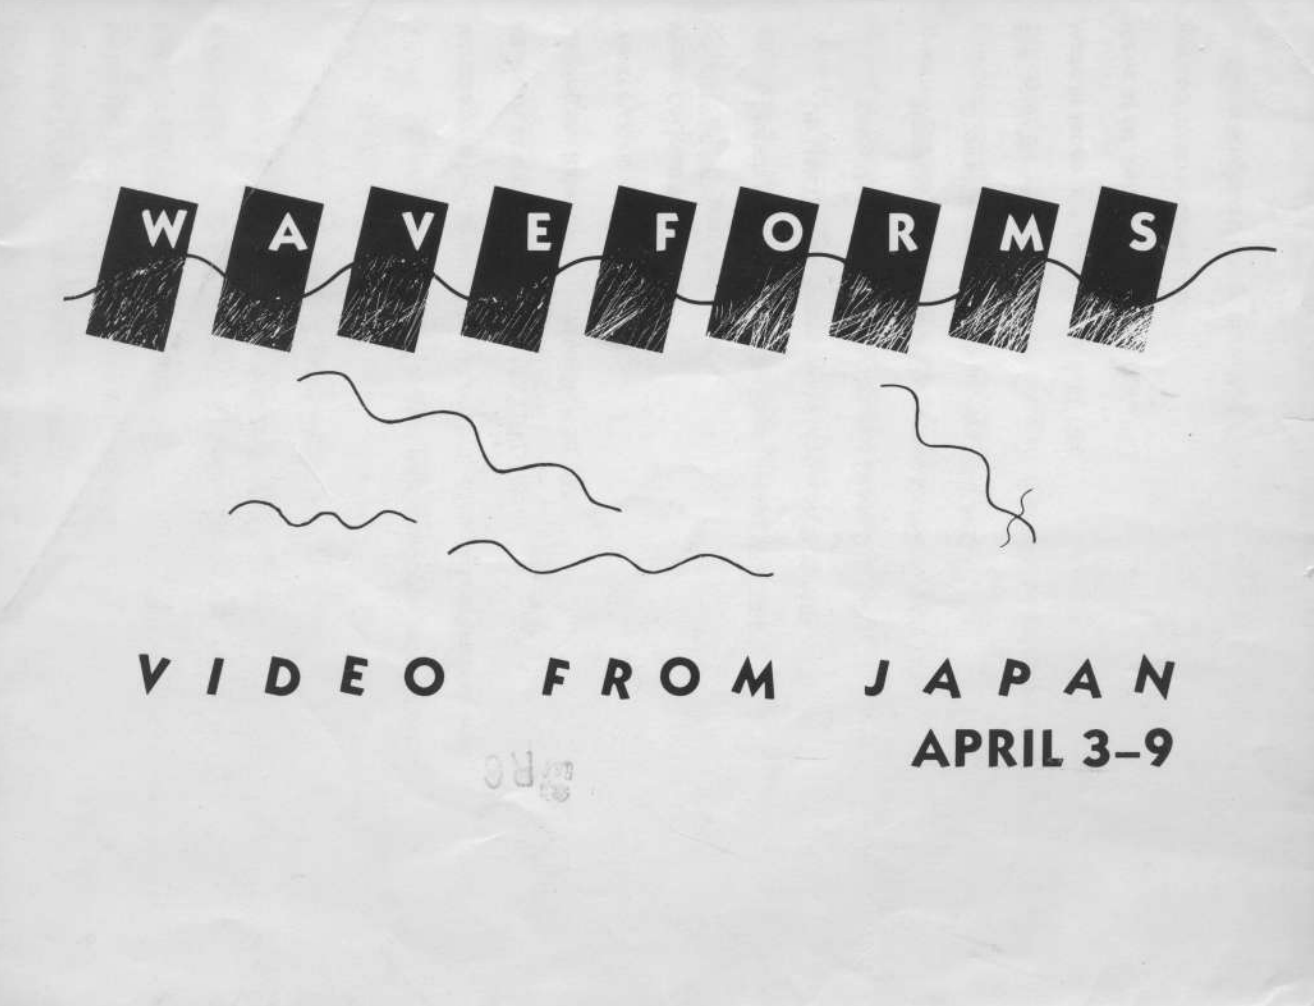 1987 WAVEFORMS Video From Japan